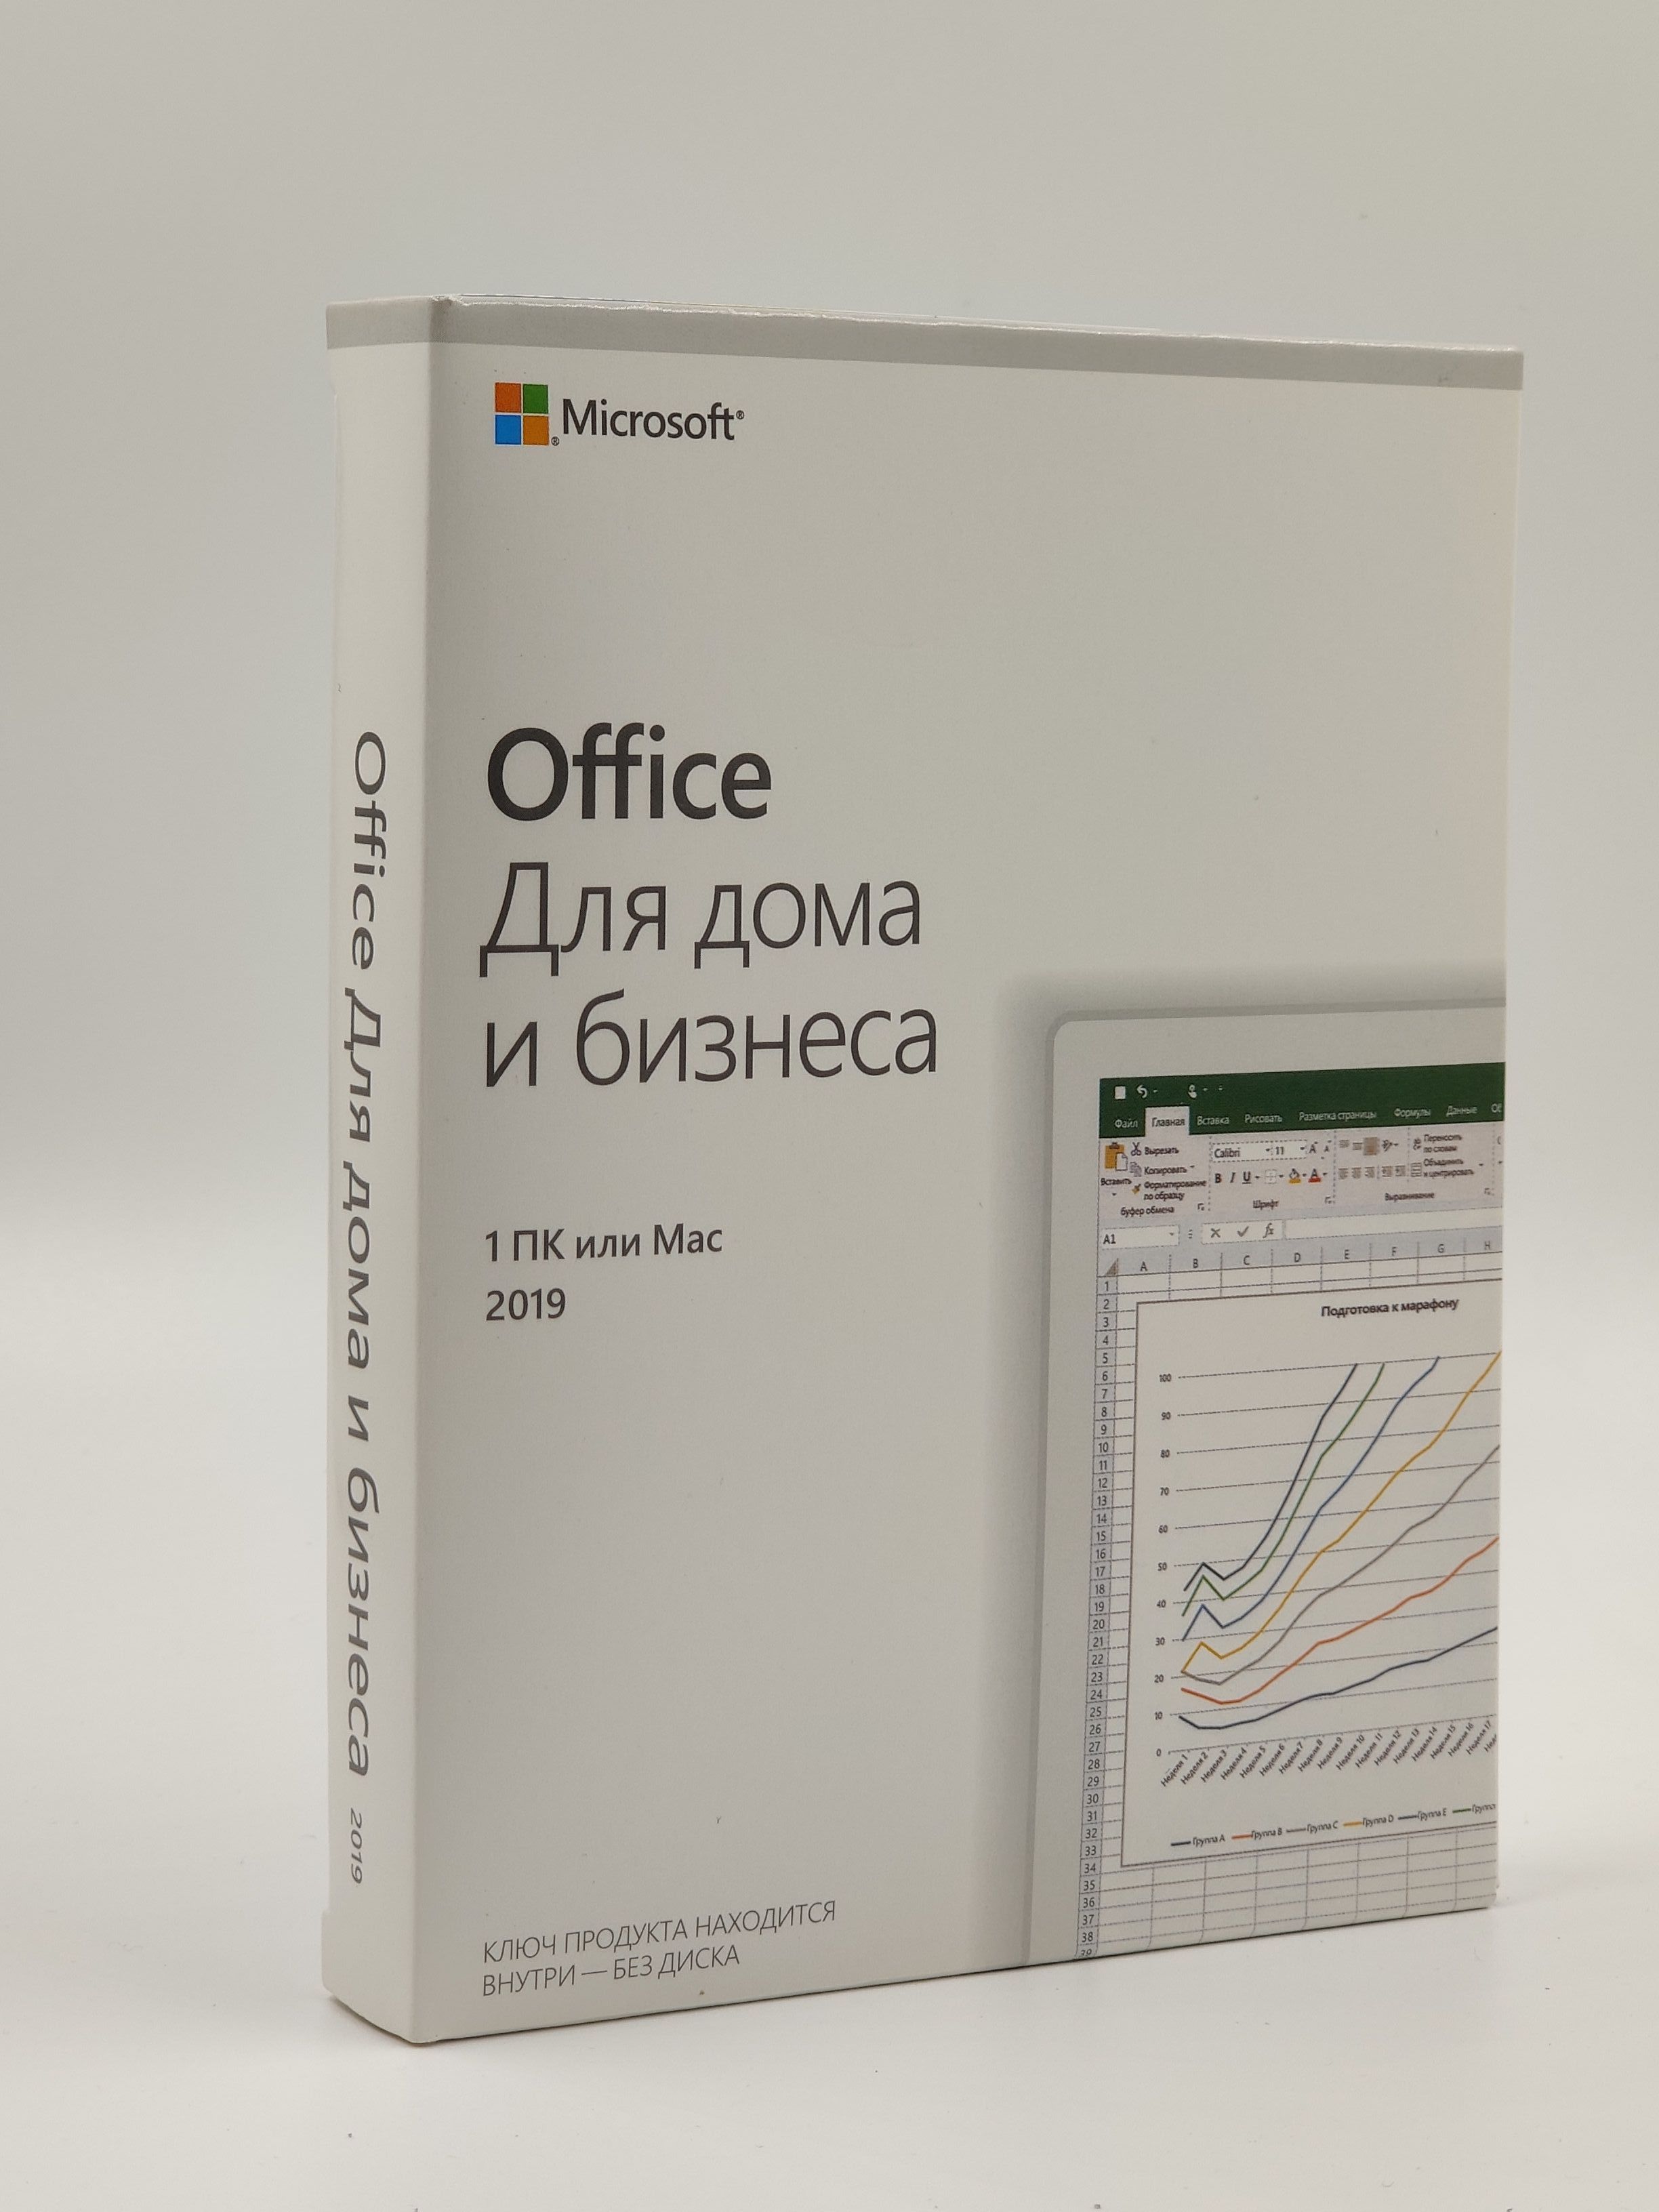 Home and business 2019. Microsoft Office 2019 Home and Business, Box. Office Home and Business 2019. Офис 2019. Home and Business 2019 3242.